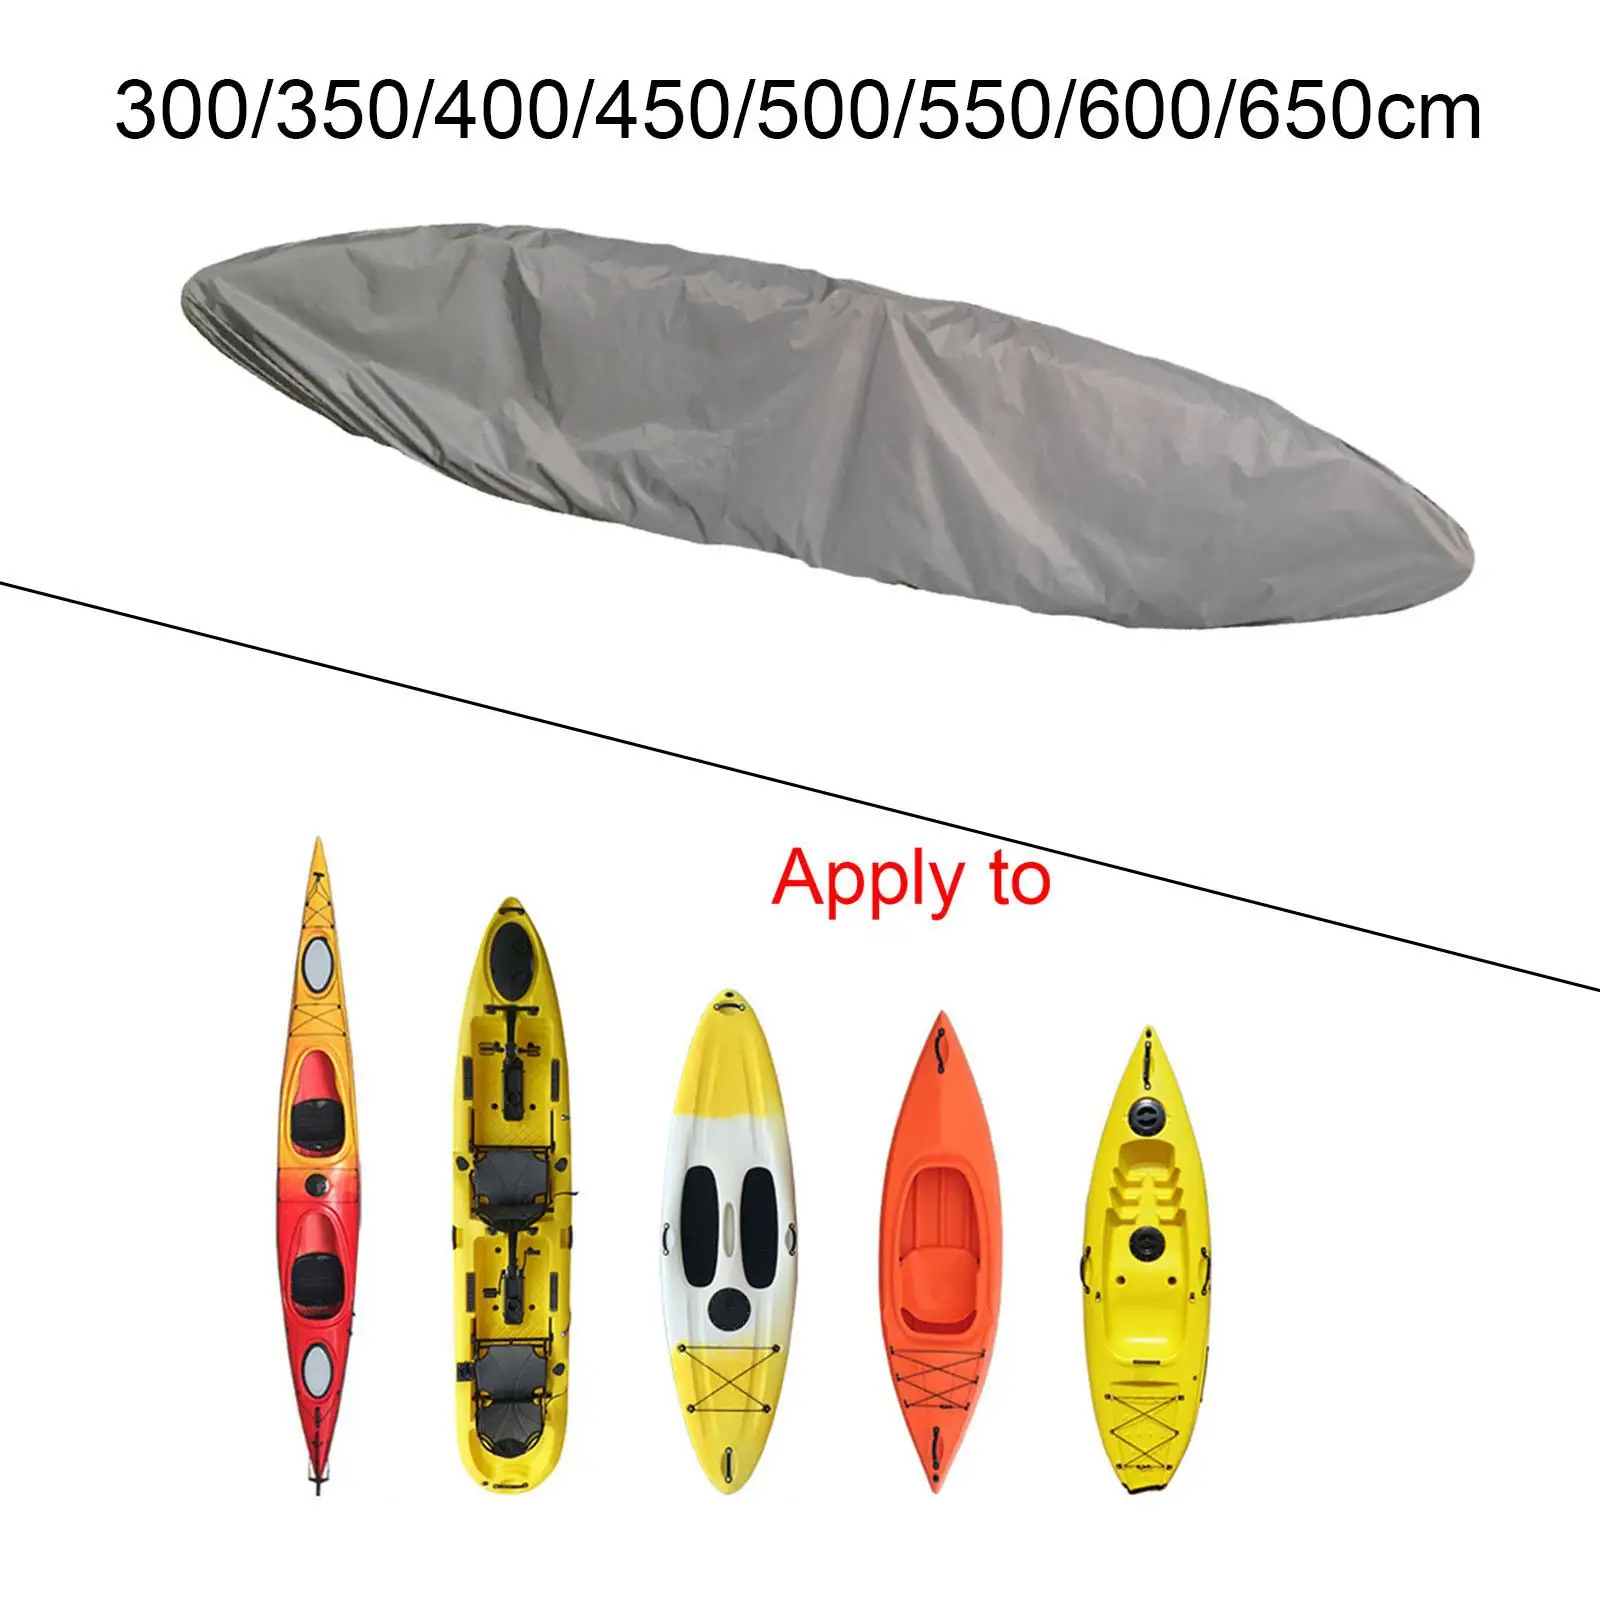 Boat Dust Cover Transport Protector Fishing Boat Cover Canoe Cover Waterproof Kayak Cover for Kayaking Surfing Canoeing Boating